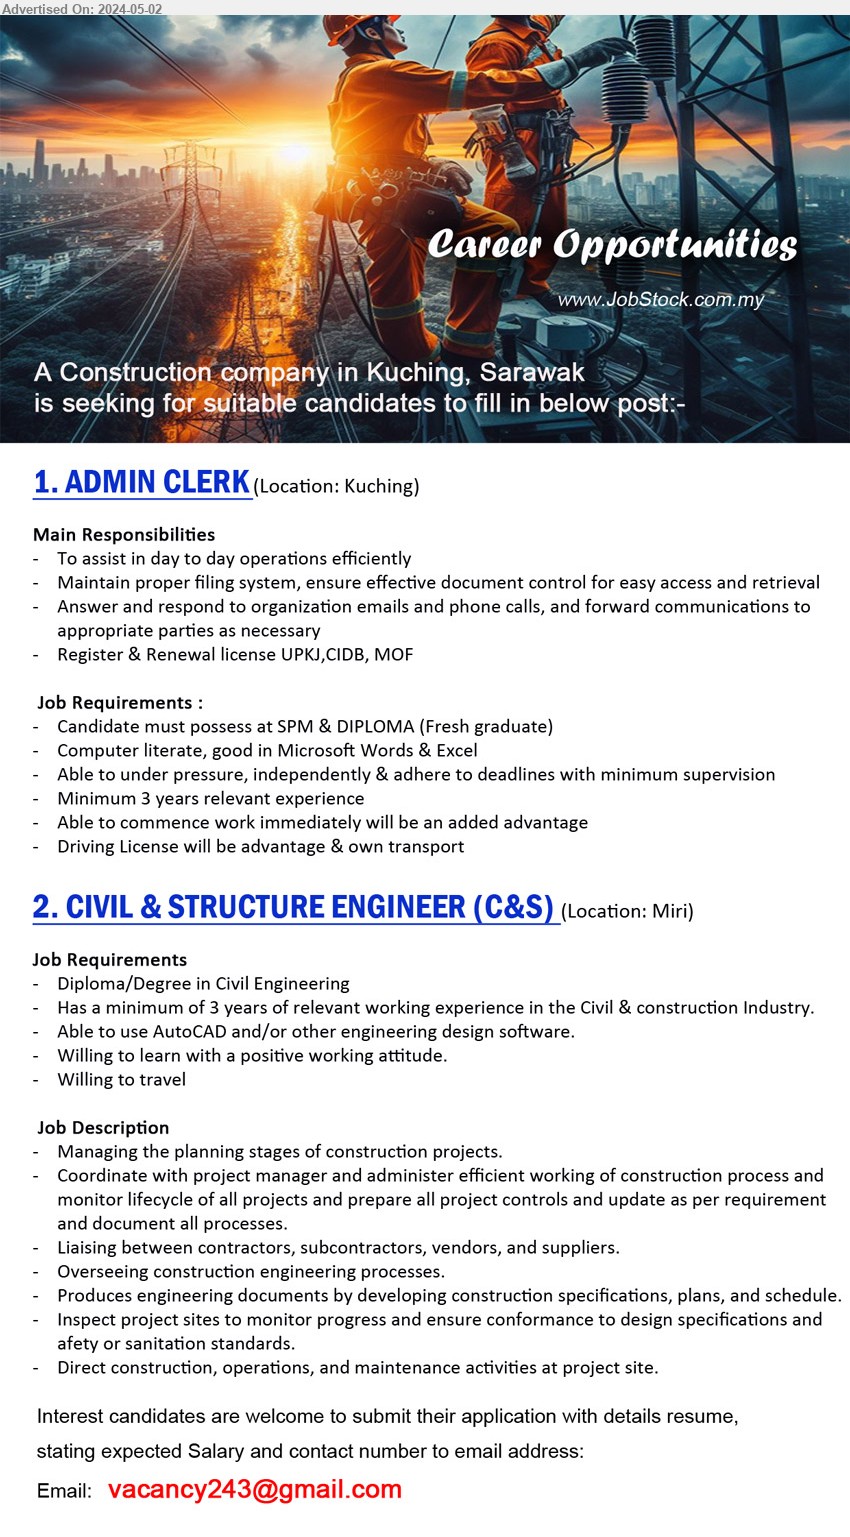 ADVERTISER (Construction Company) - 1. ADMIN CLERK (Kuching), SPM & DIPLOMA (Fresh graduate), Computer literate, good in Microsoft Words & Excel,...
2. CIVIL & STRUCTURE ENGINEER (C&S) (Miri), Diploma/Degree in Civil Engineering, Has a minimum of 3 years of relevant working experience in the Civil & construction Industry.,...
Email resume to ...